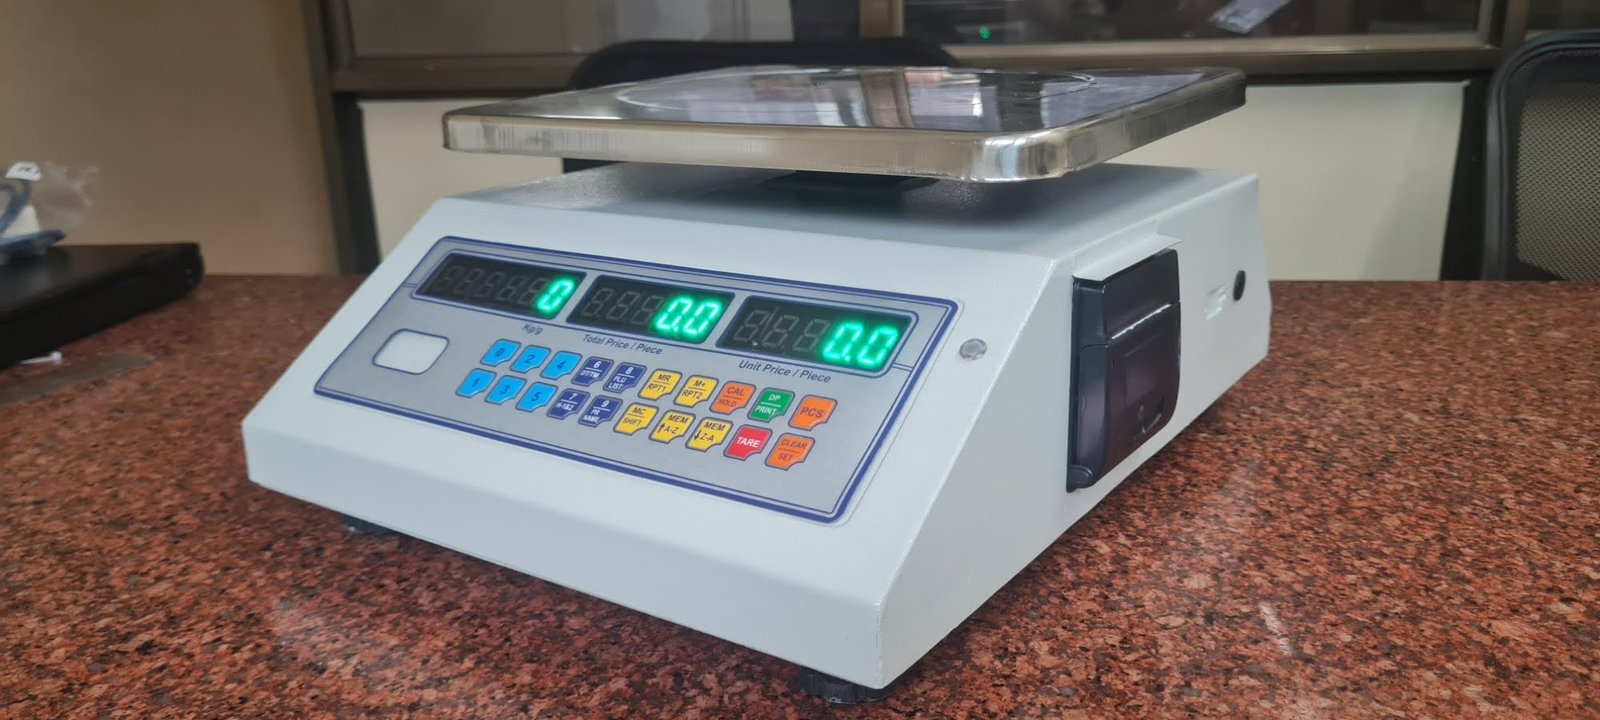 WEIGHIING SCALE WITH PRINTER